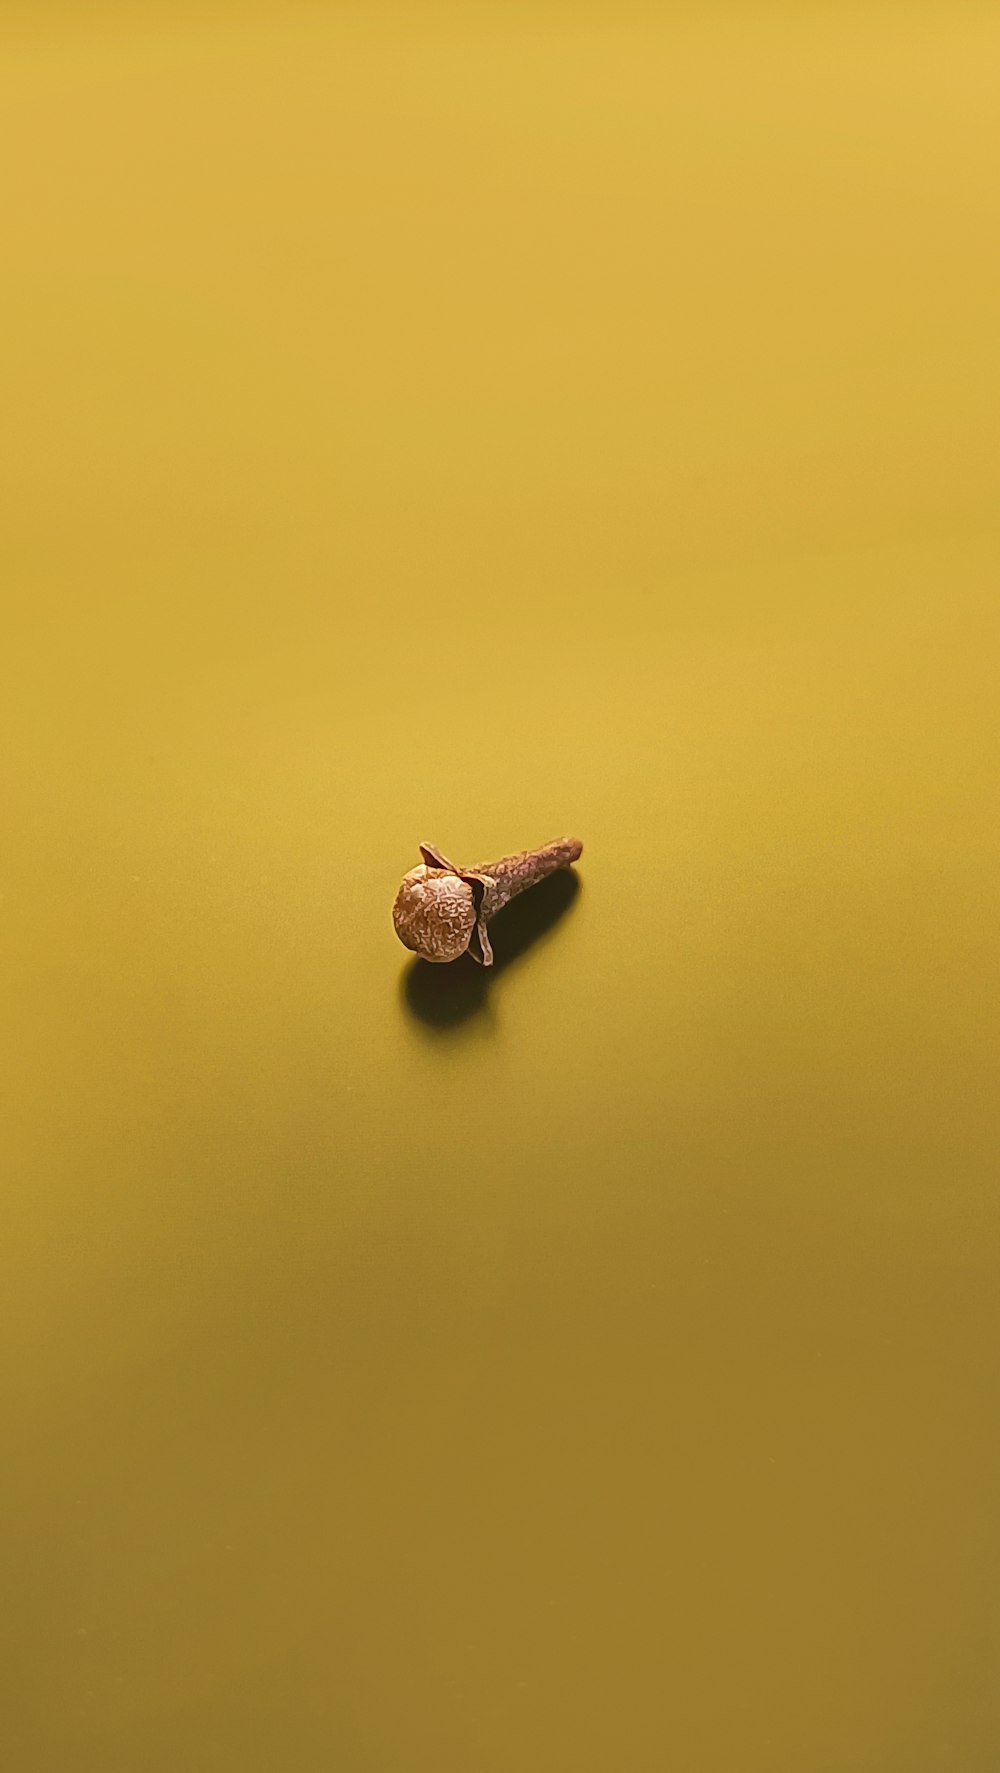 a single leaf on a yellow surface